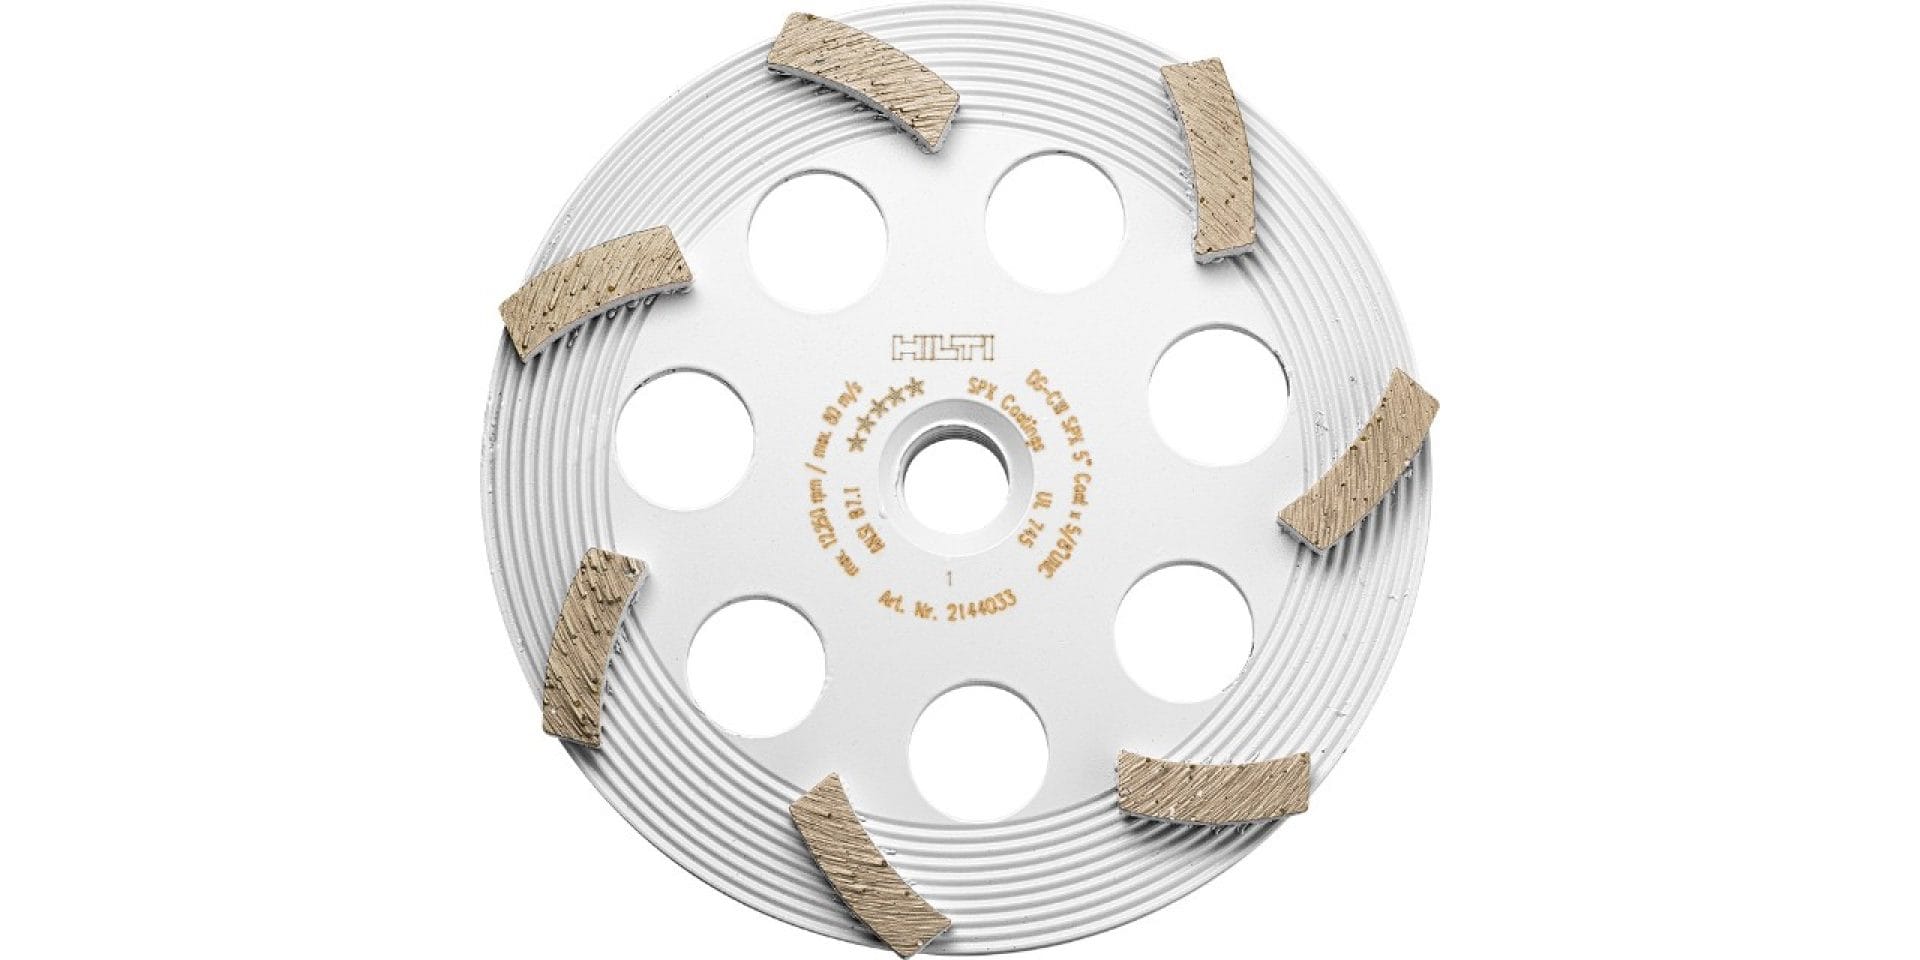 Hilti SPX universal diamond grinding cup wheel with coating